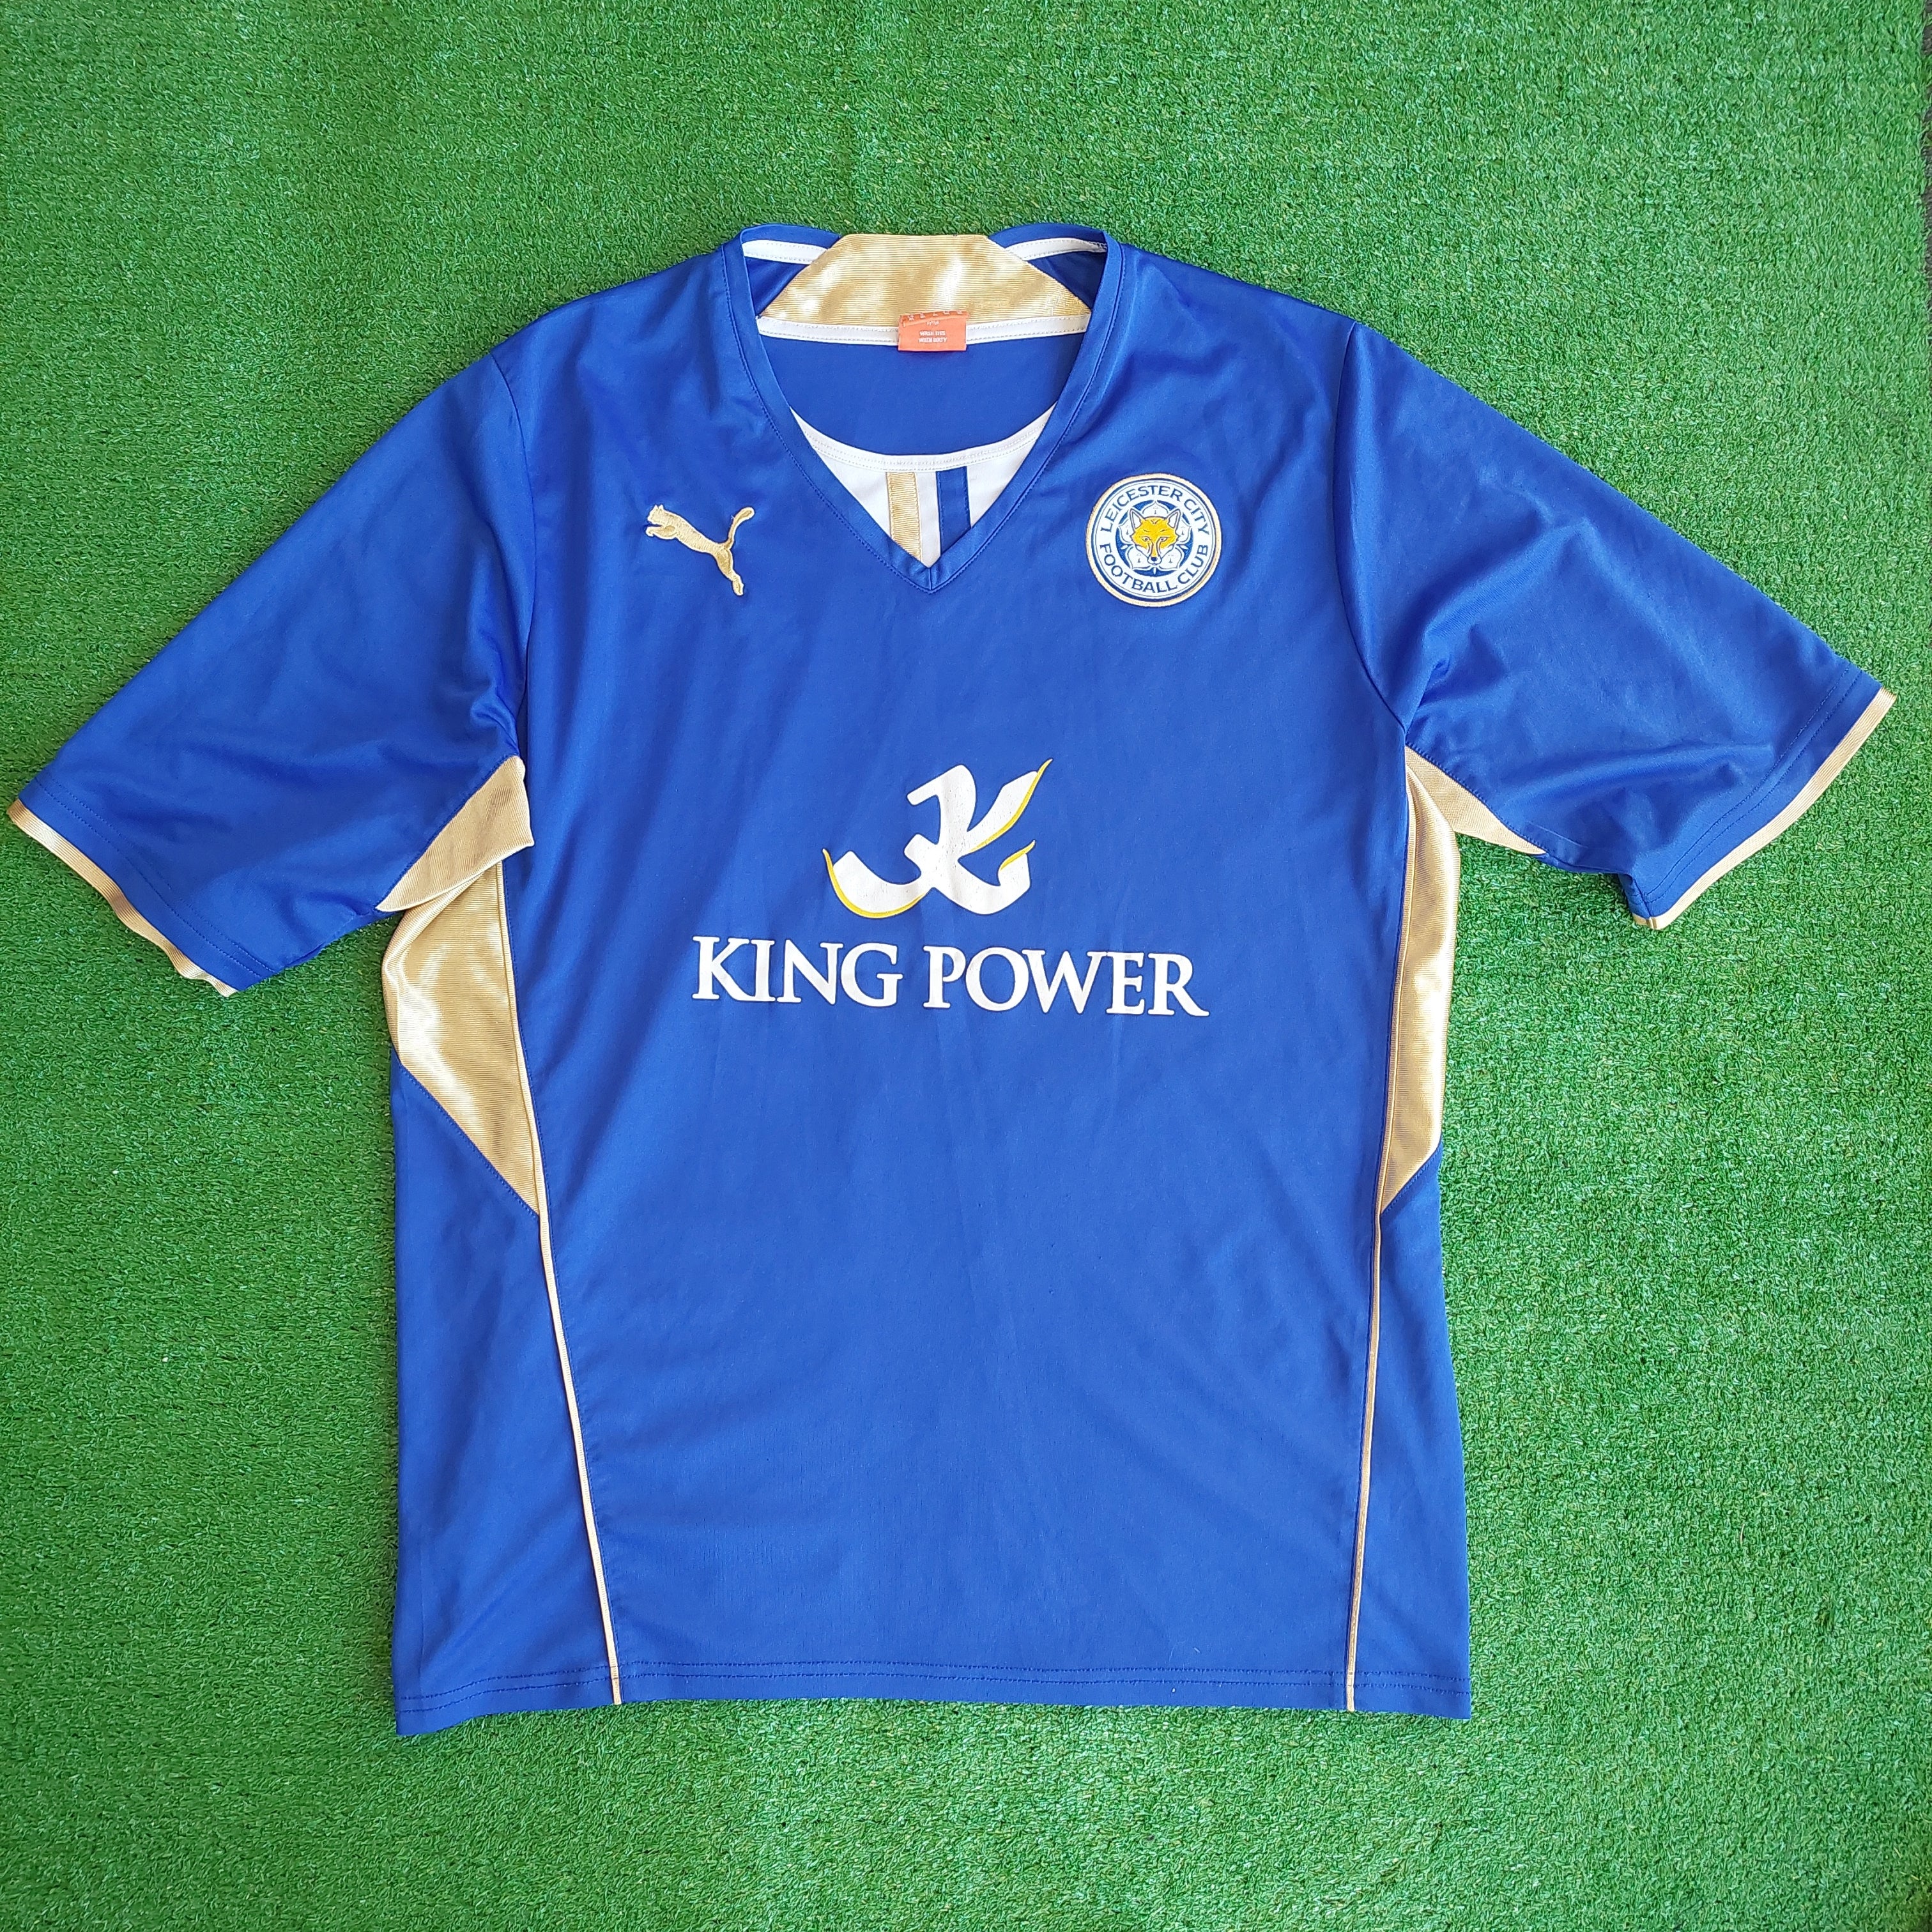 leicester city jersey 2019 20